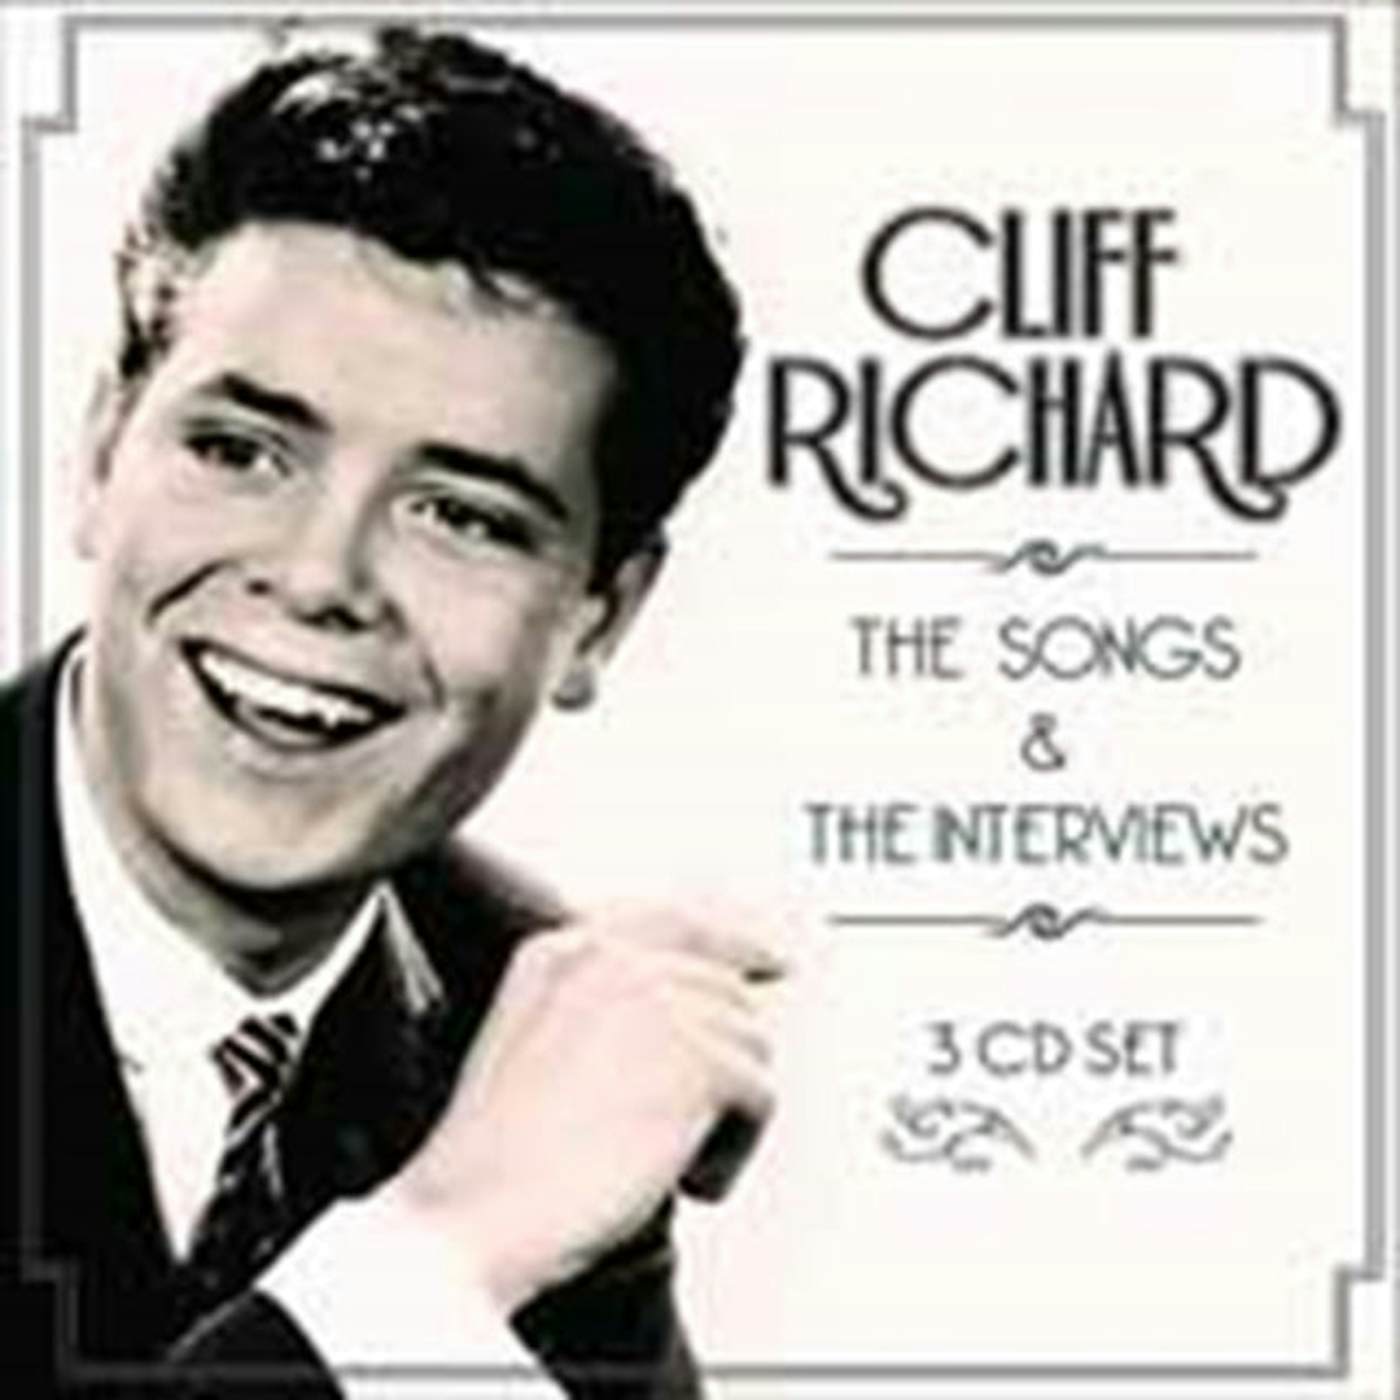 Cliff Richard CD - The Songs And The Interviews (3cd)